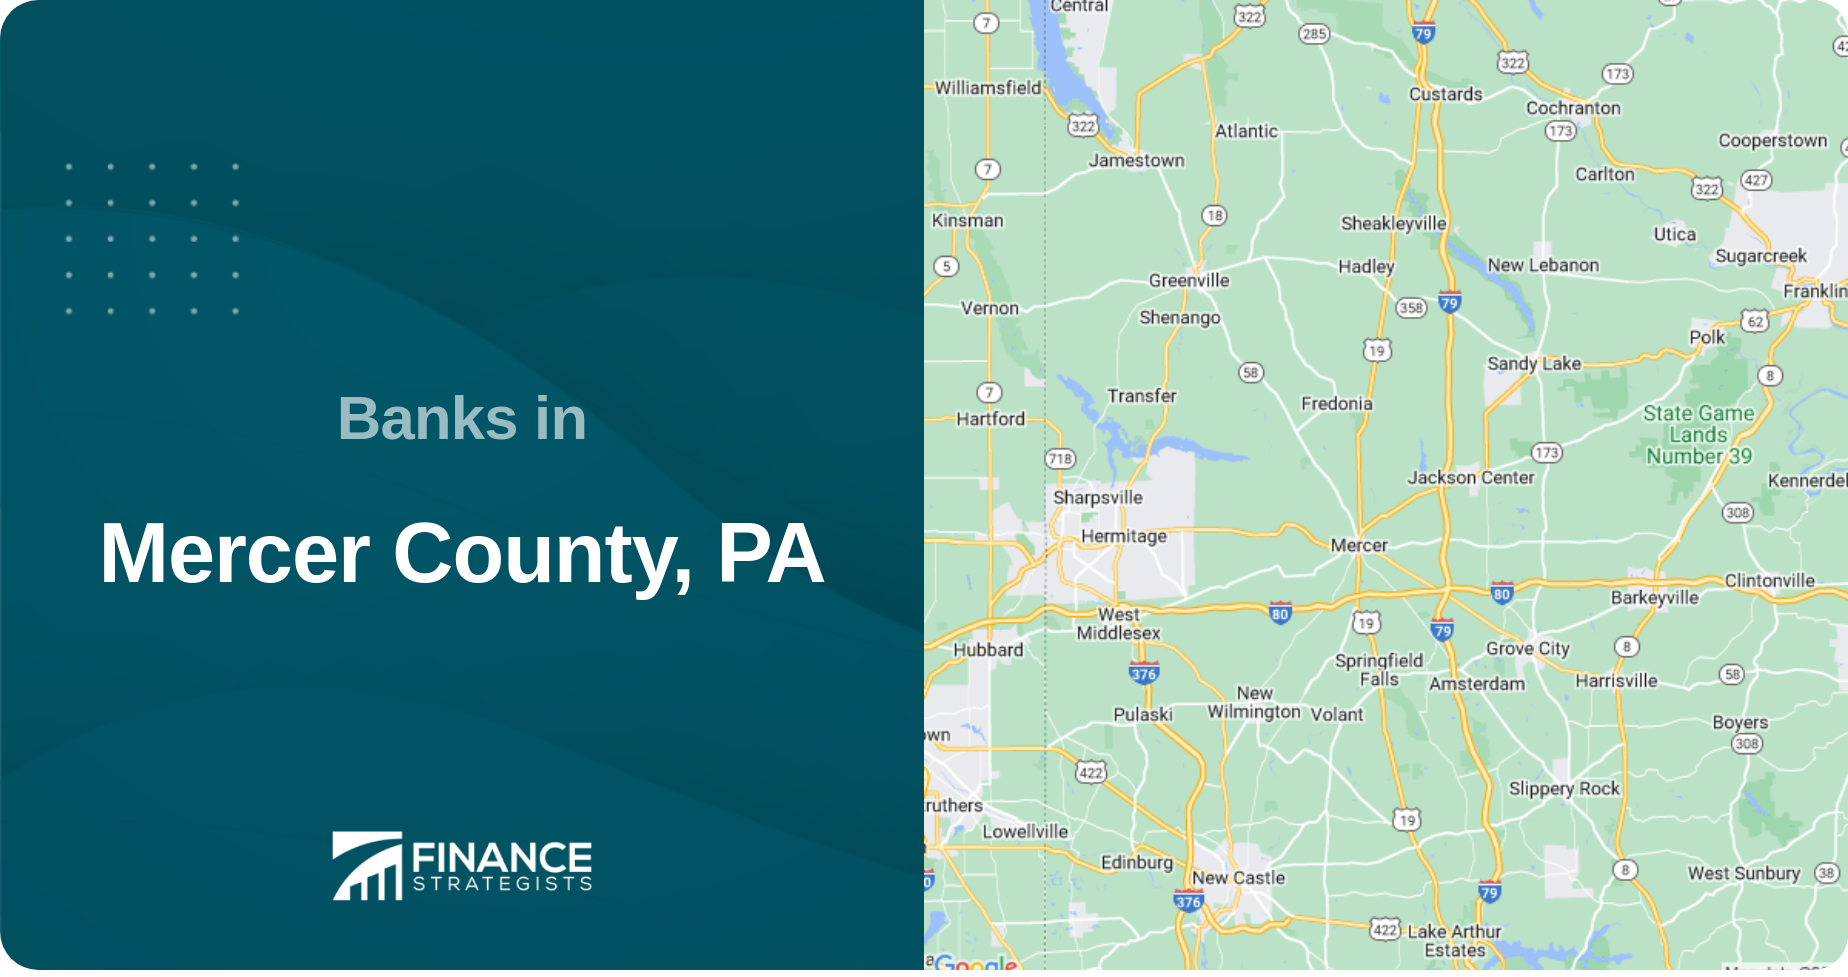 Banks in Mercer County, PA